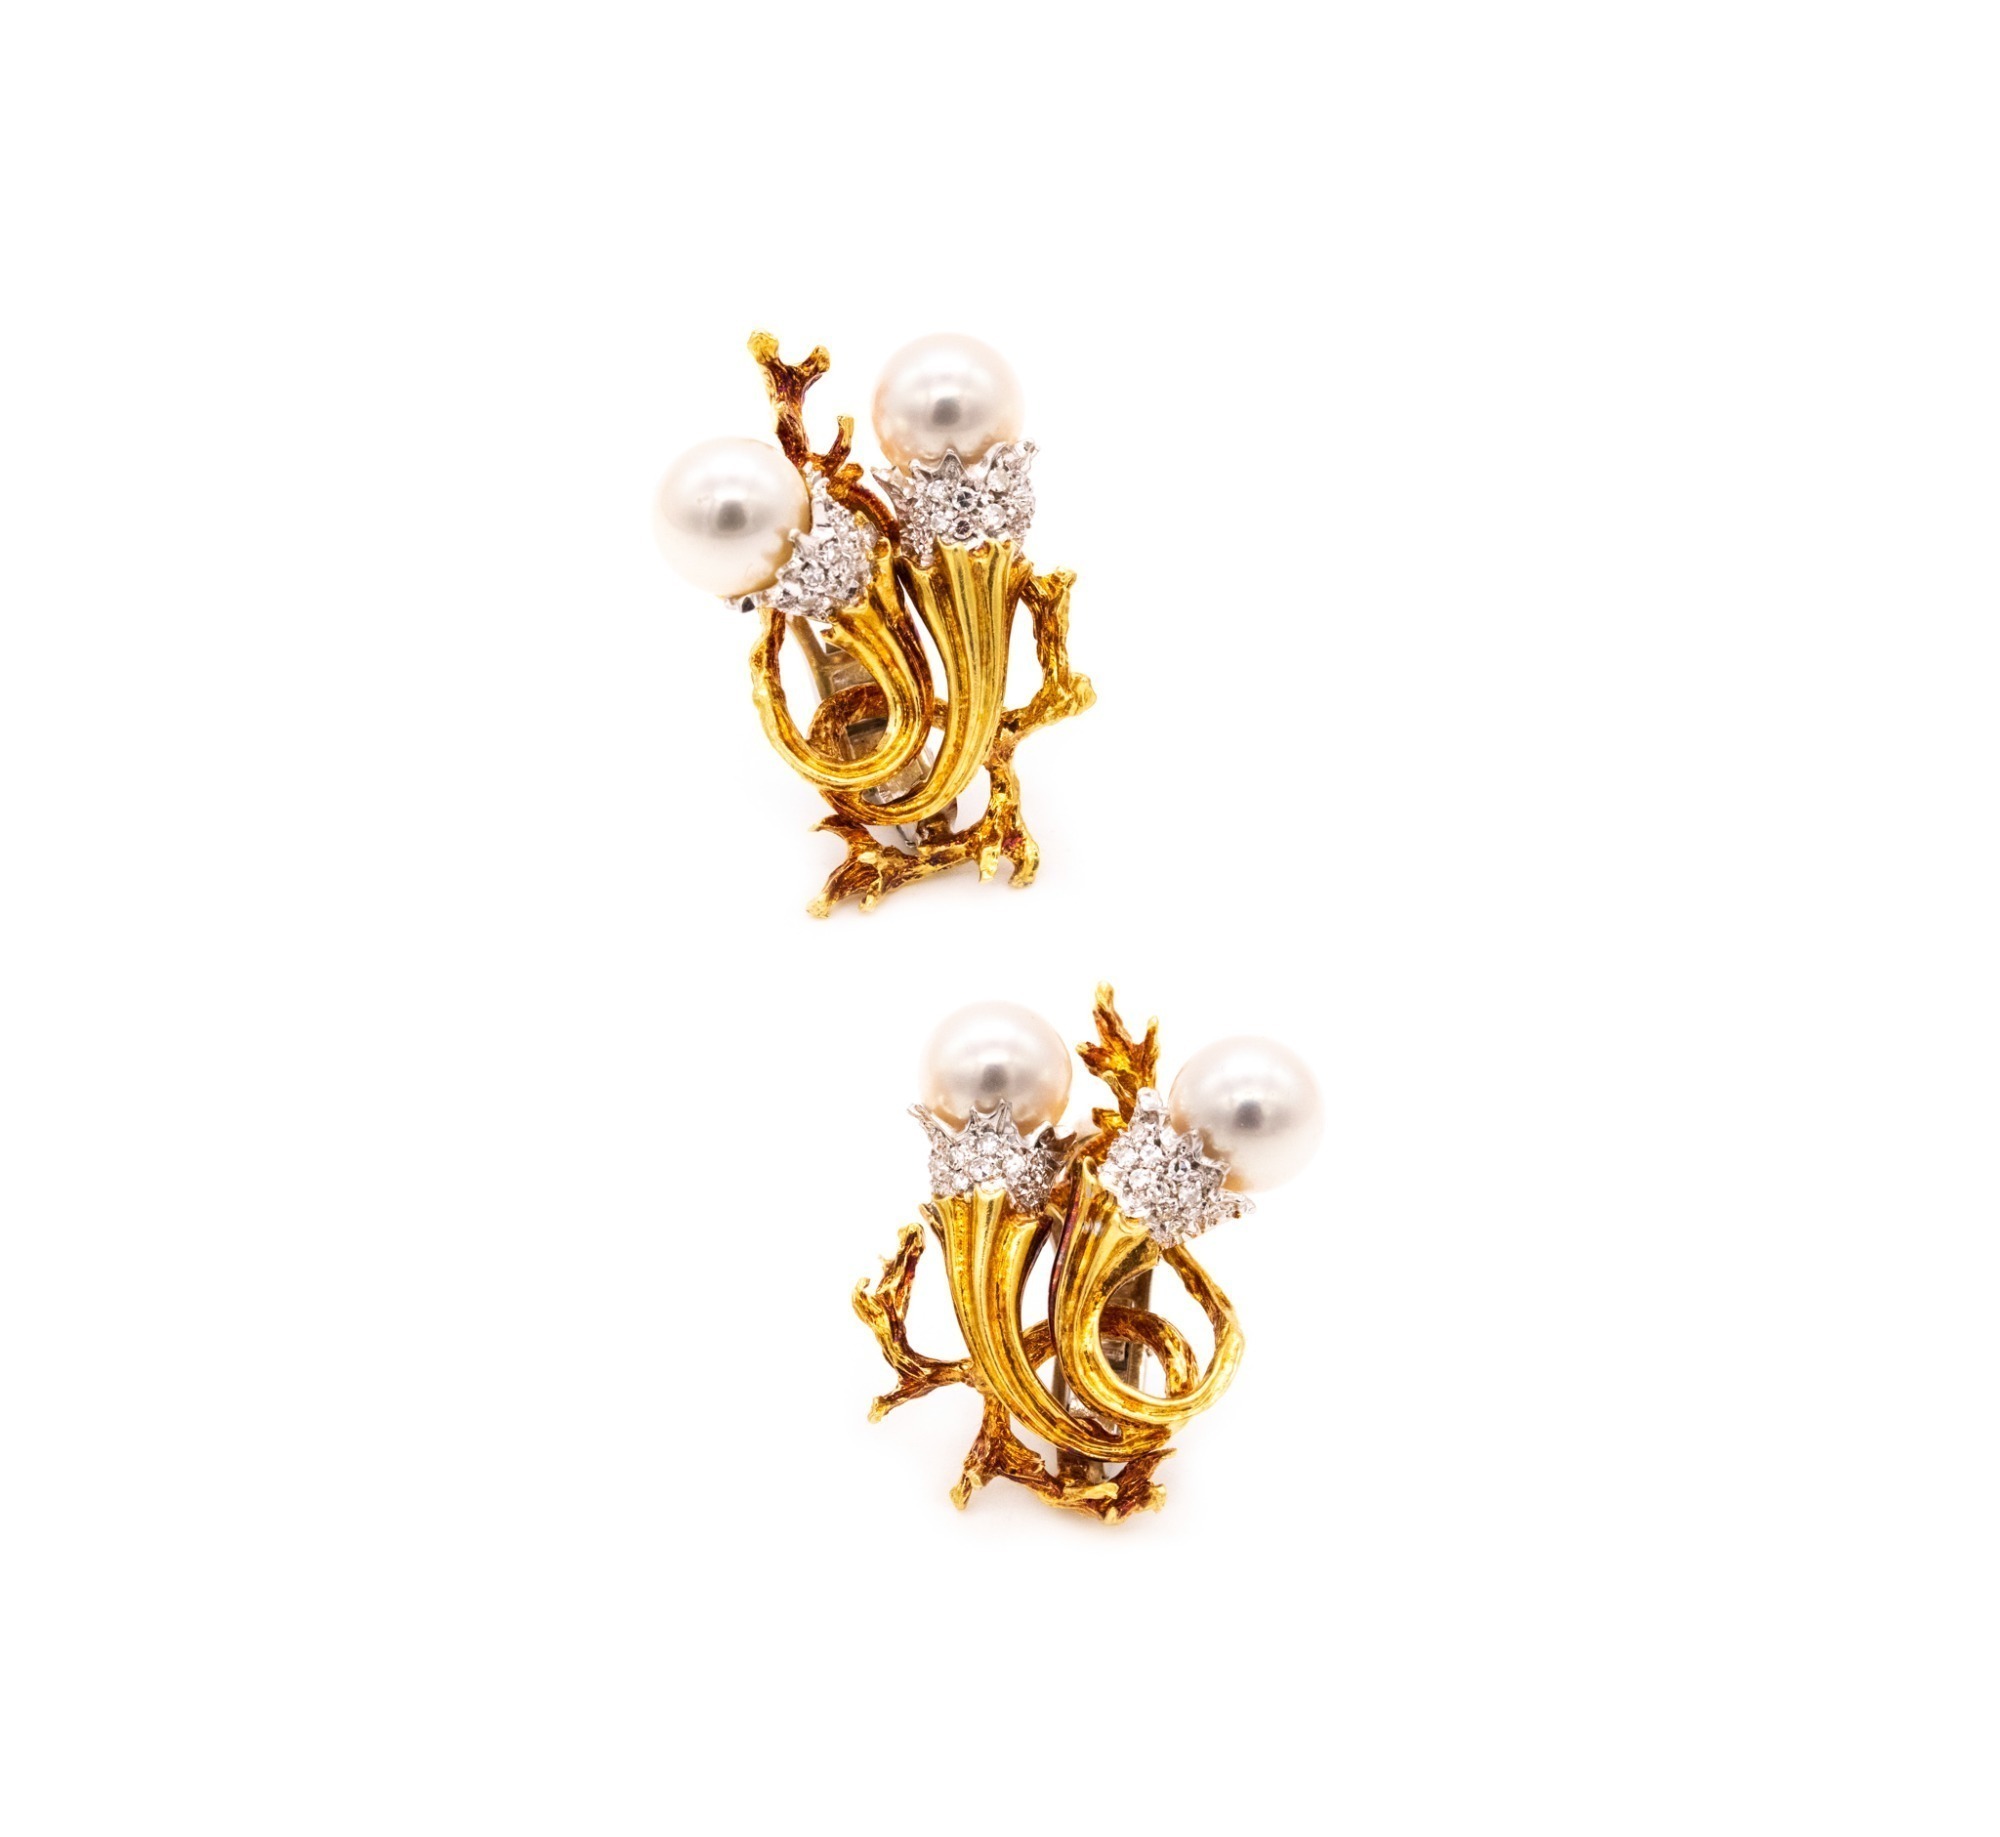 18K GOLD PLATINUM DIAMOND AND PEARL TORCHIERE EARRINGS SIGNED BLITS, CIRCA 1960